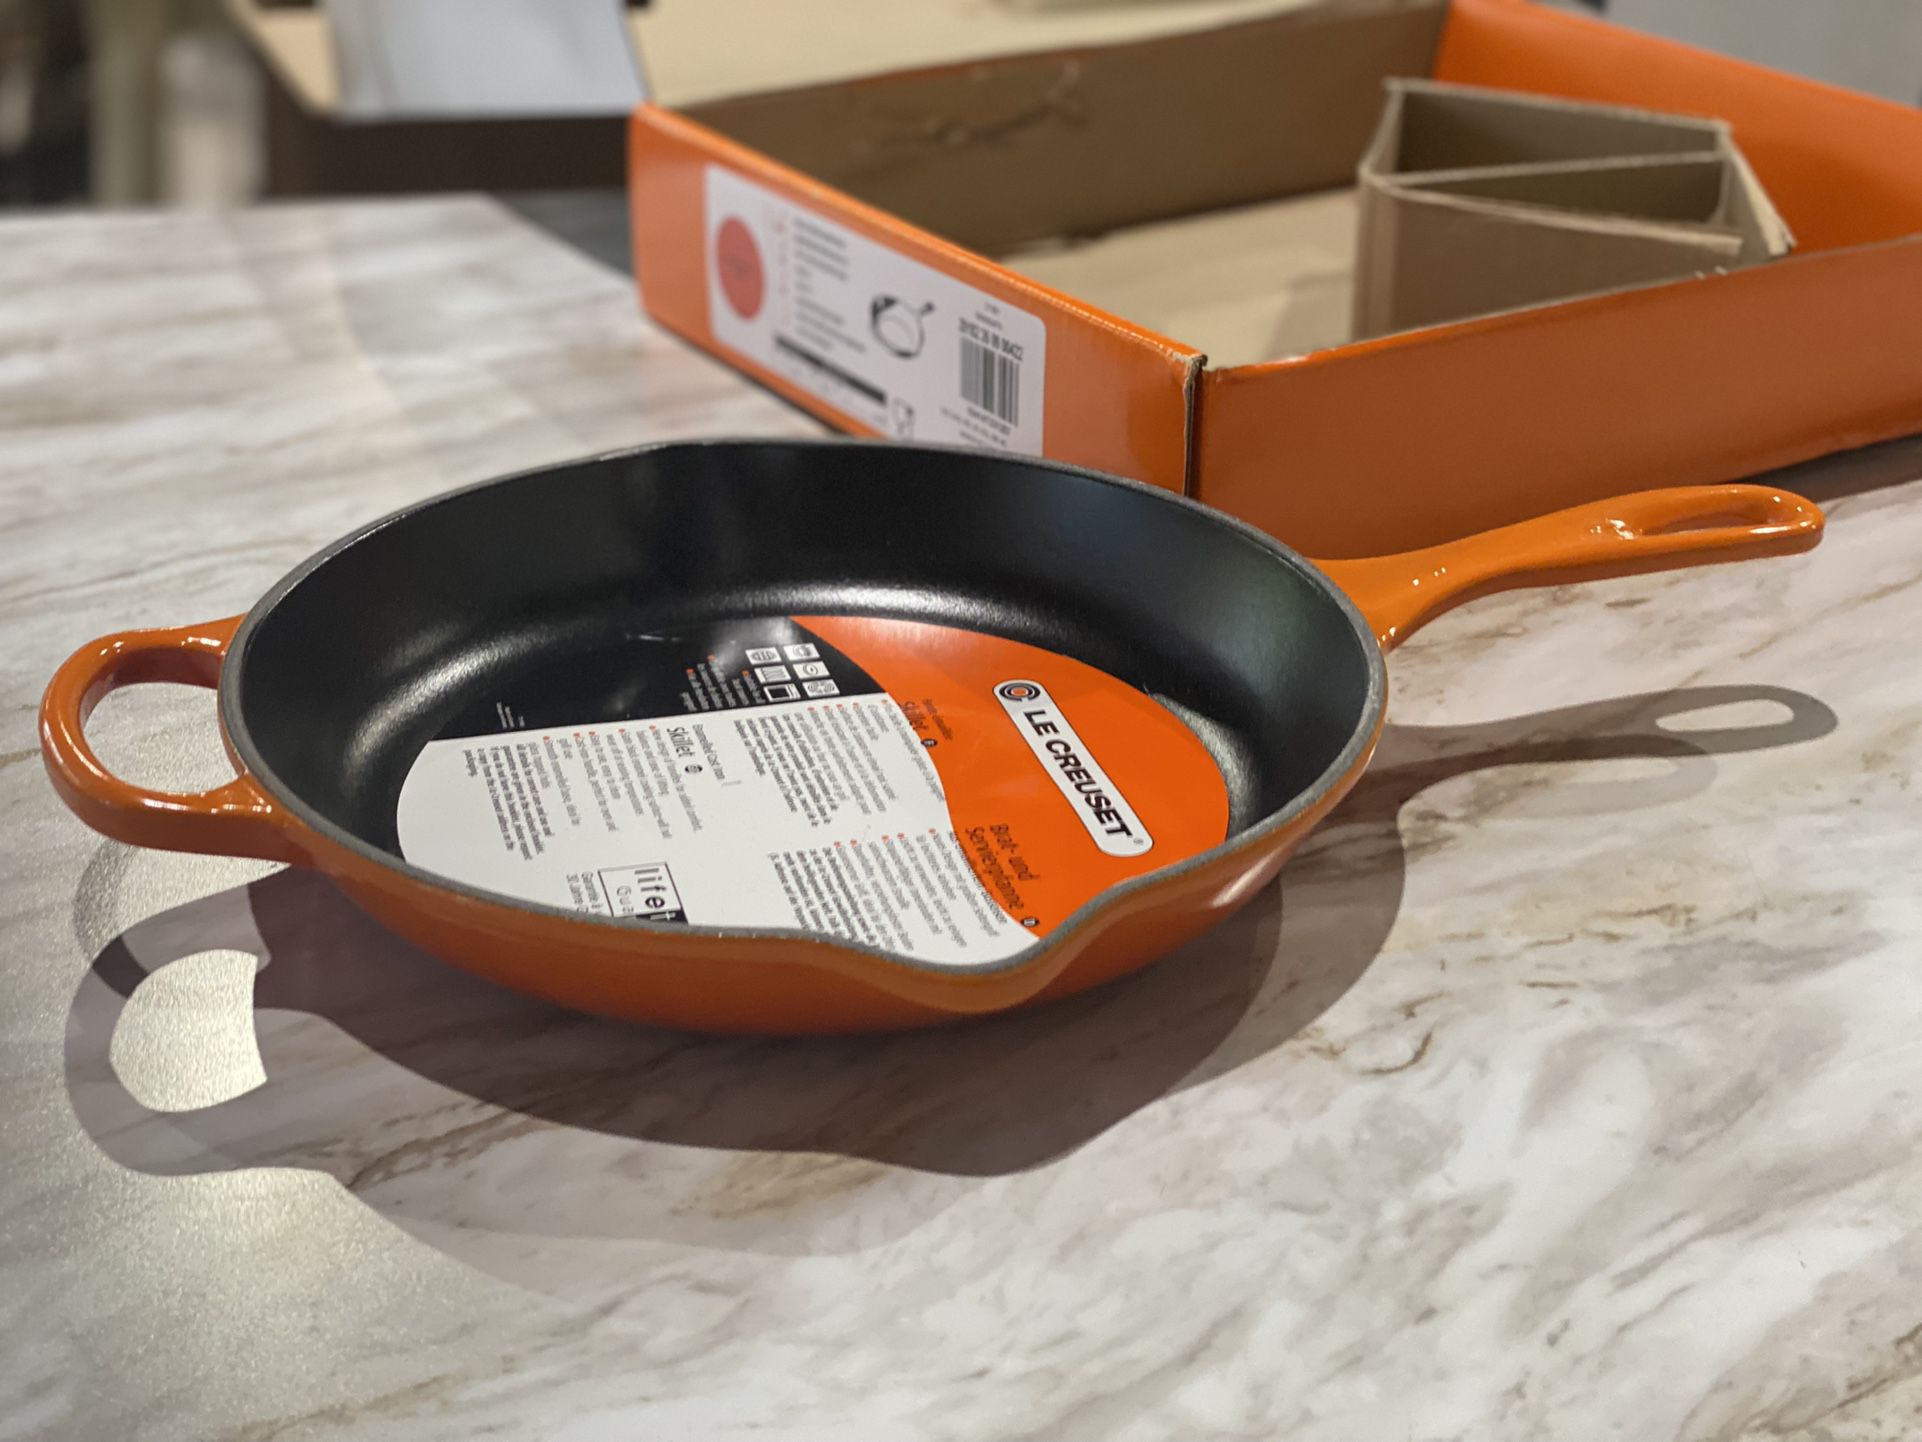 Le Creuset Enameled Cast Iron Signature Iron Handle Skillet, 10.25" (1-3/4 qt.), Flame. Made in France. MSRP $189. Our price $123 + sales tax  